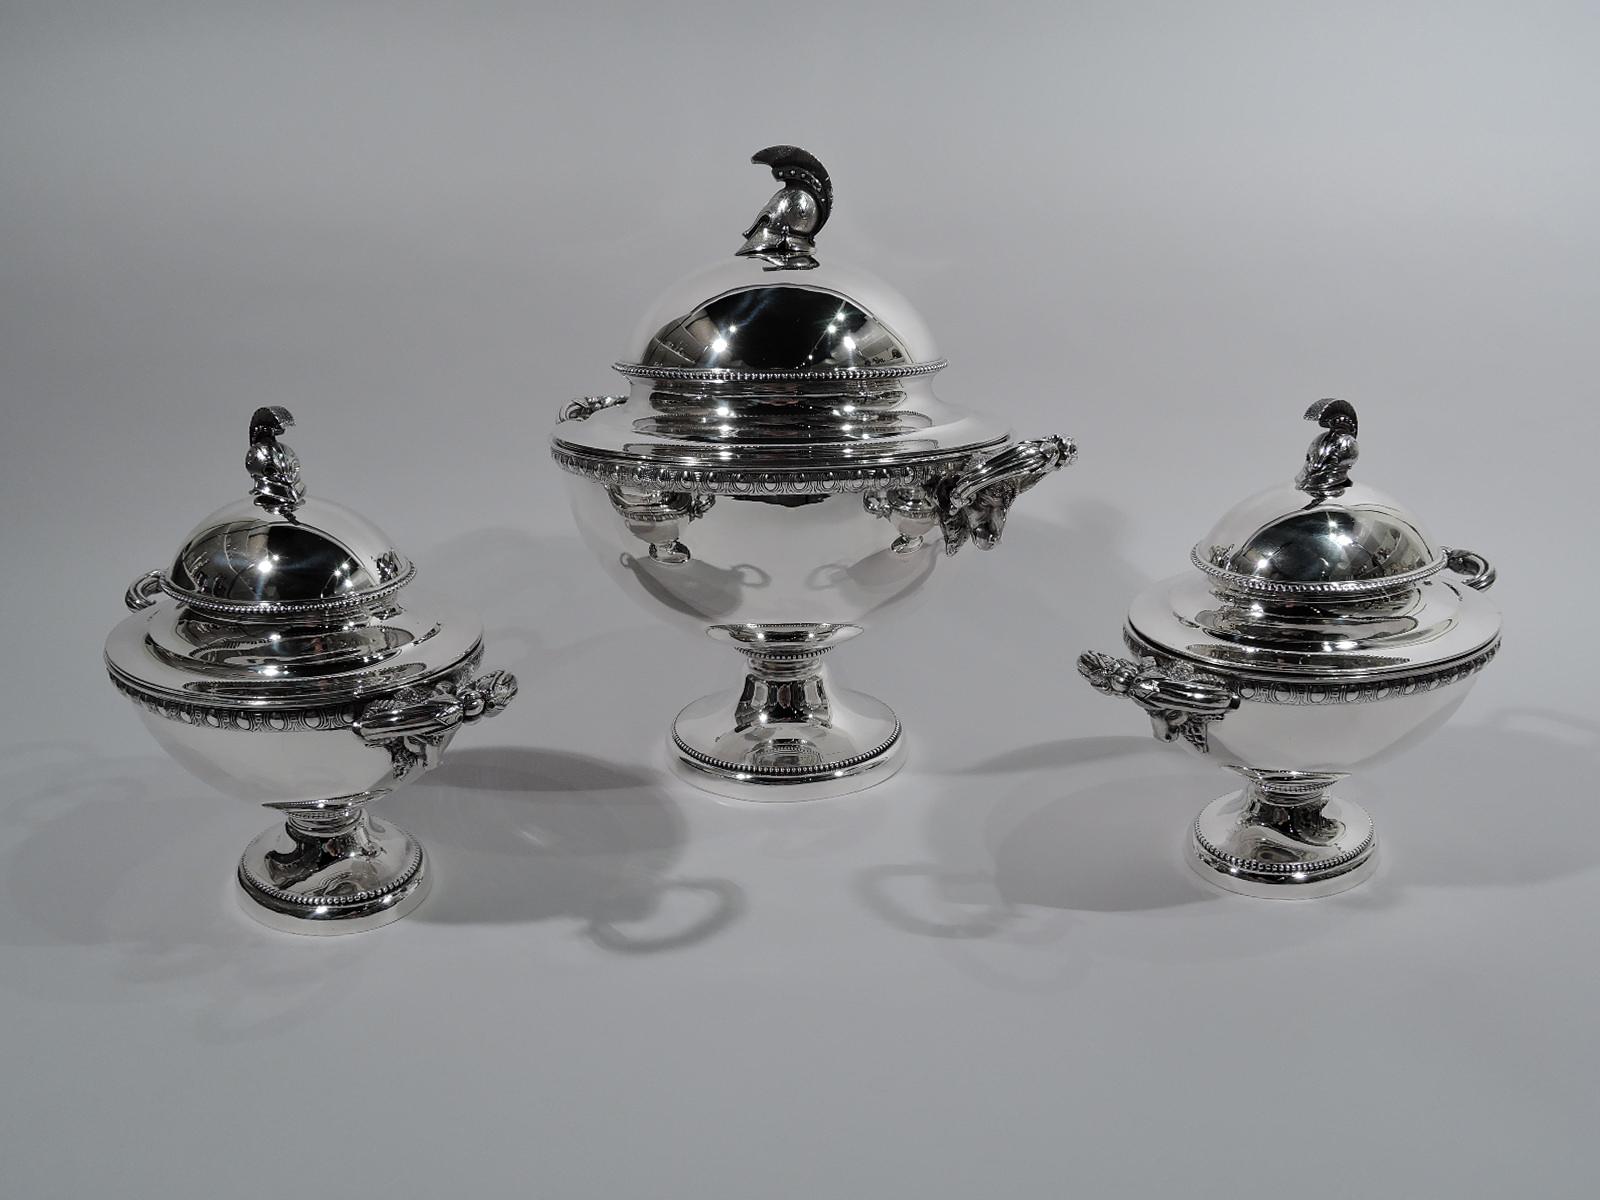 Set of 3 Etruscan Revival sterling silver tureens. Made by JC Moore & Son for Tiffany & Co. in New York, circa 1865. This set comprises 1 large round tureen and 2 small oval tureens.

Each: Tapering, ovoid body on raised foot. Egg-and-dart border.